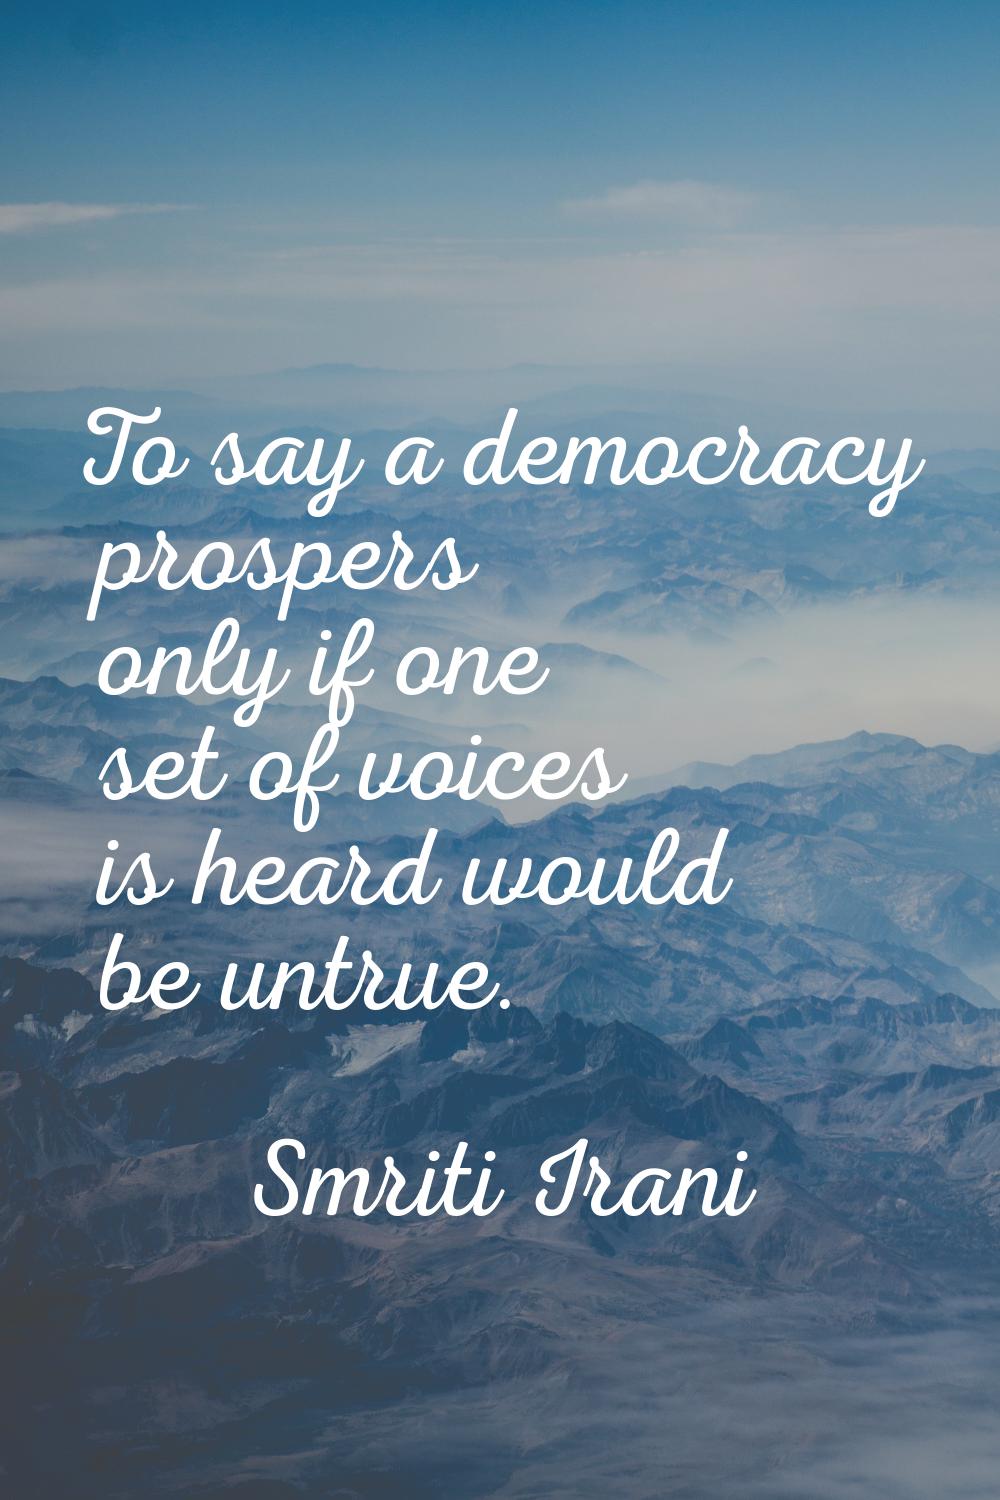 To say a democracy prospers only if one set of voices is heard would be untrue.